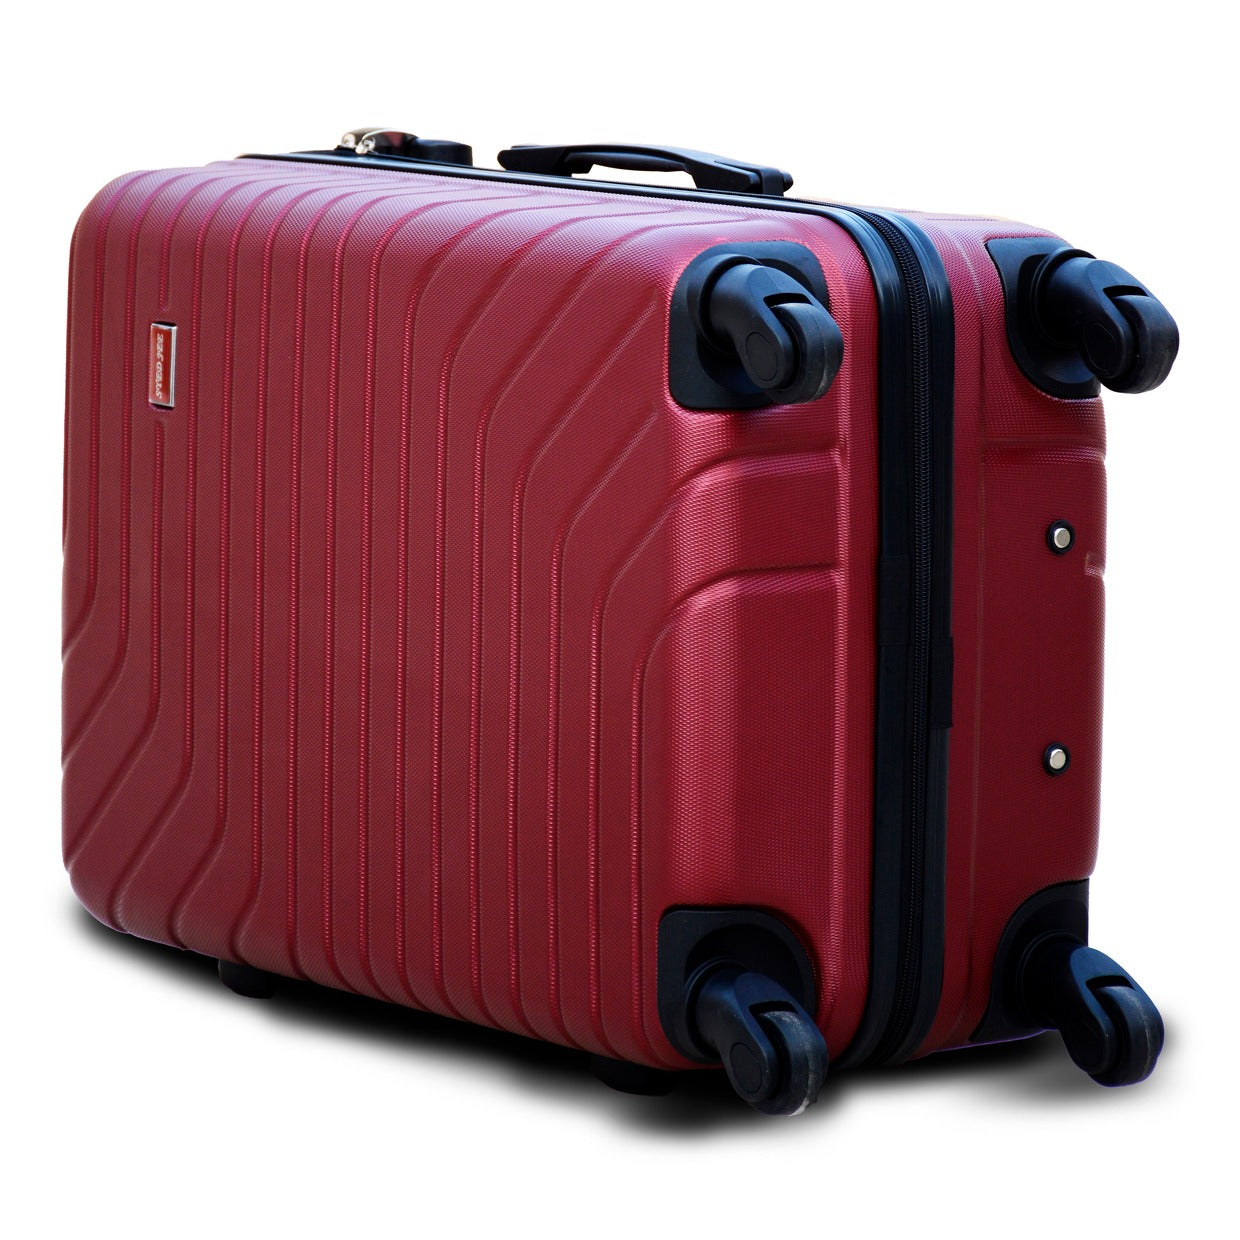 24" Red Colour SJ ABS Luggage Lightweight Hard Case Trolley Bag | 2 Year Warranty